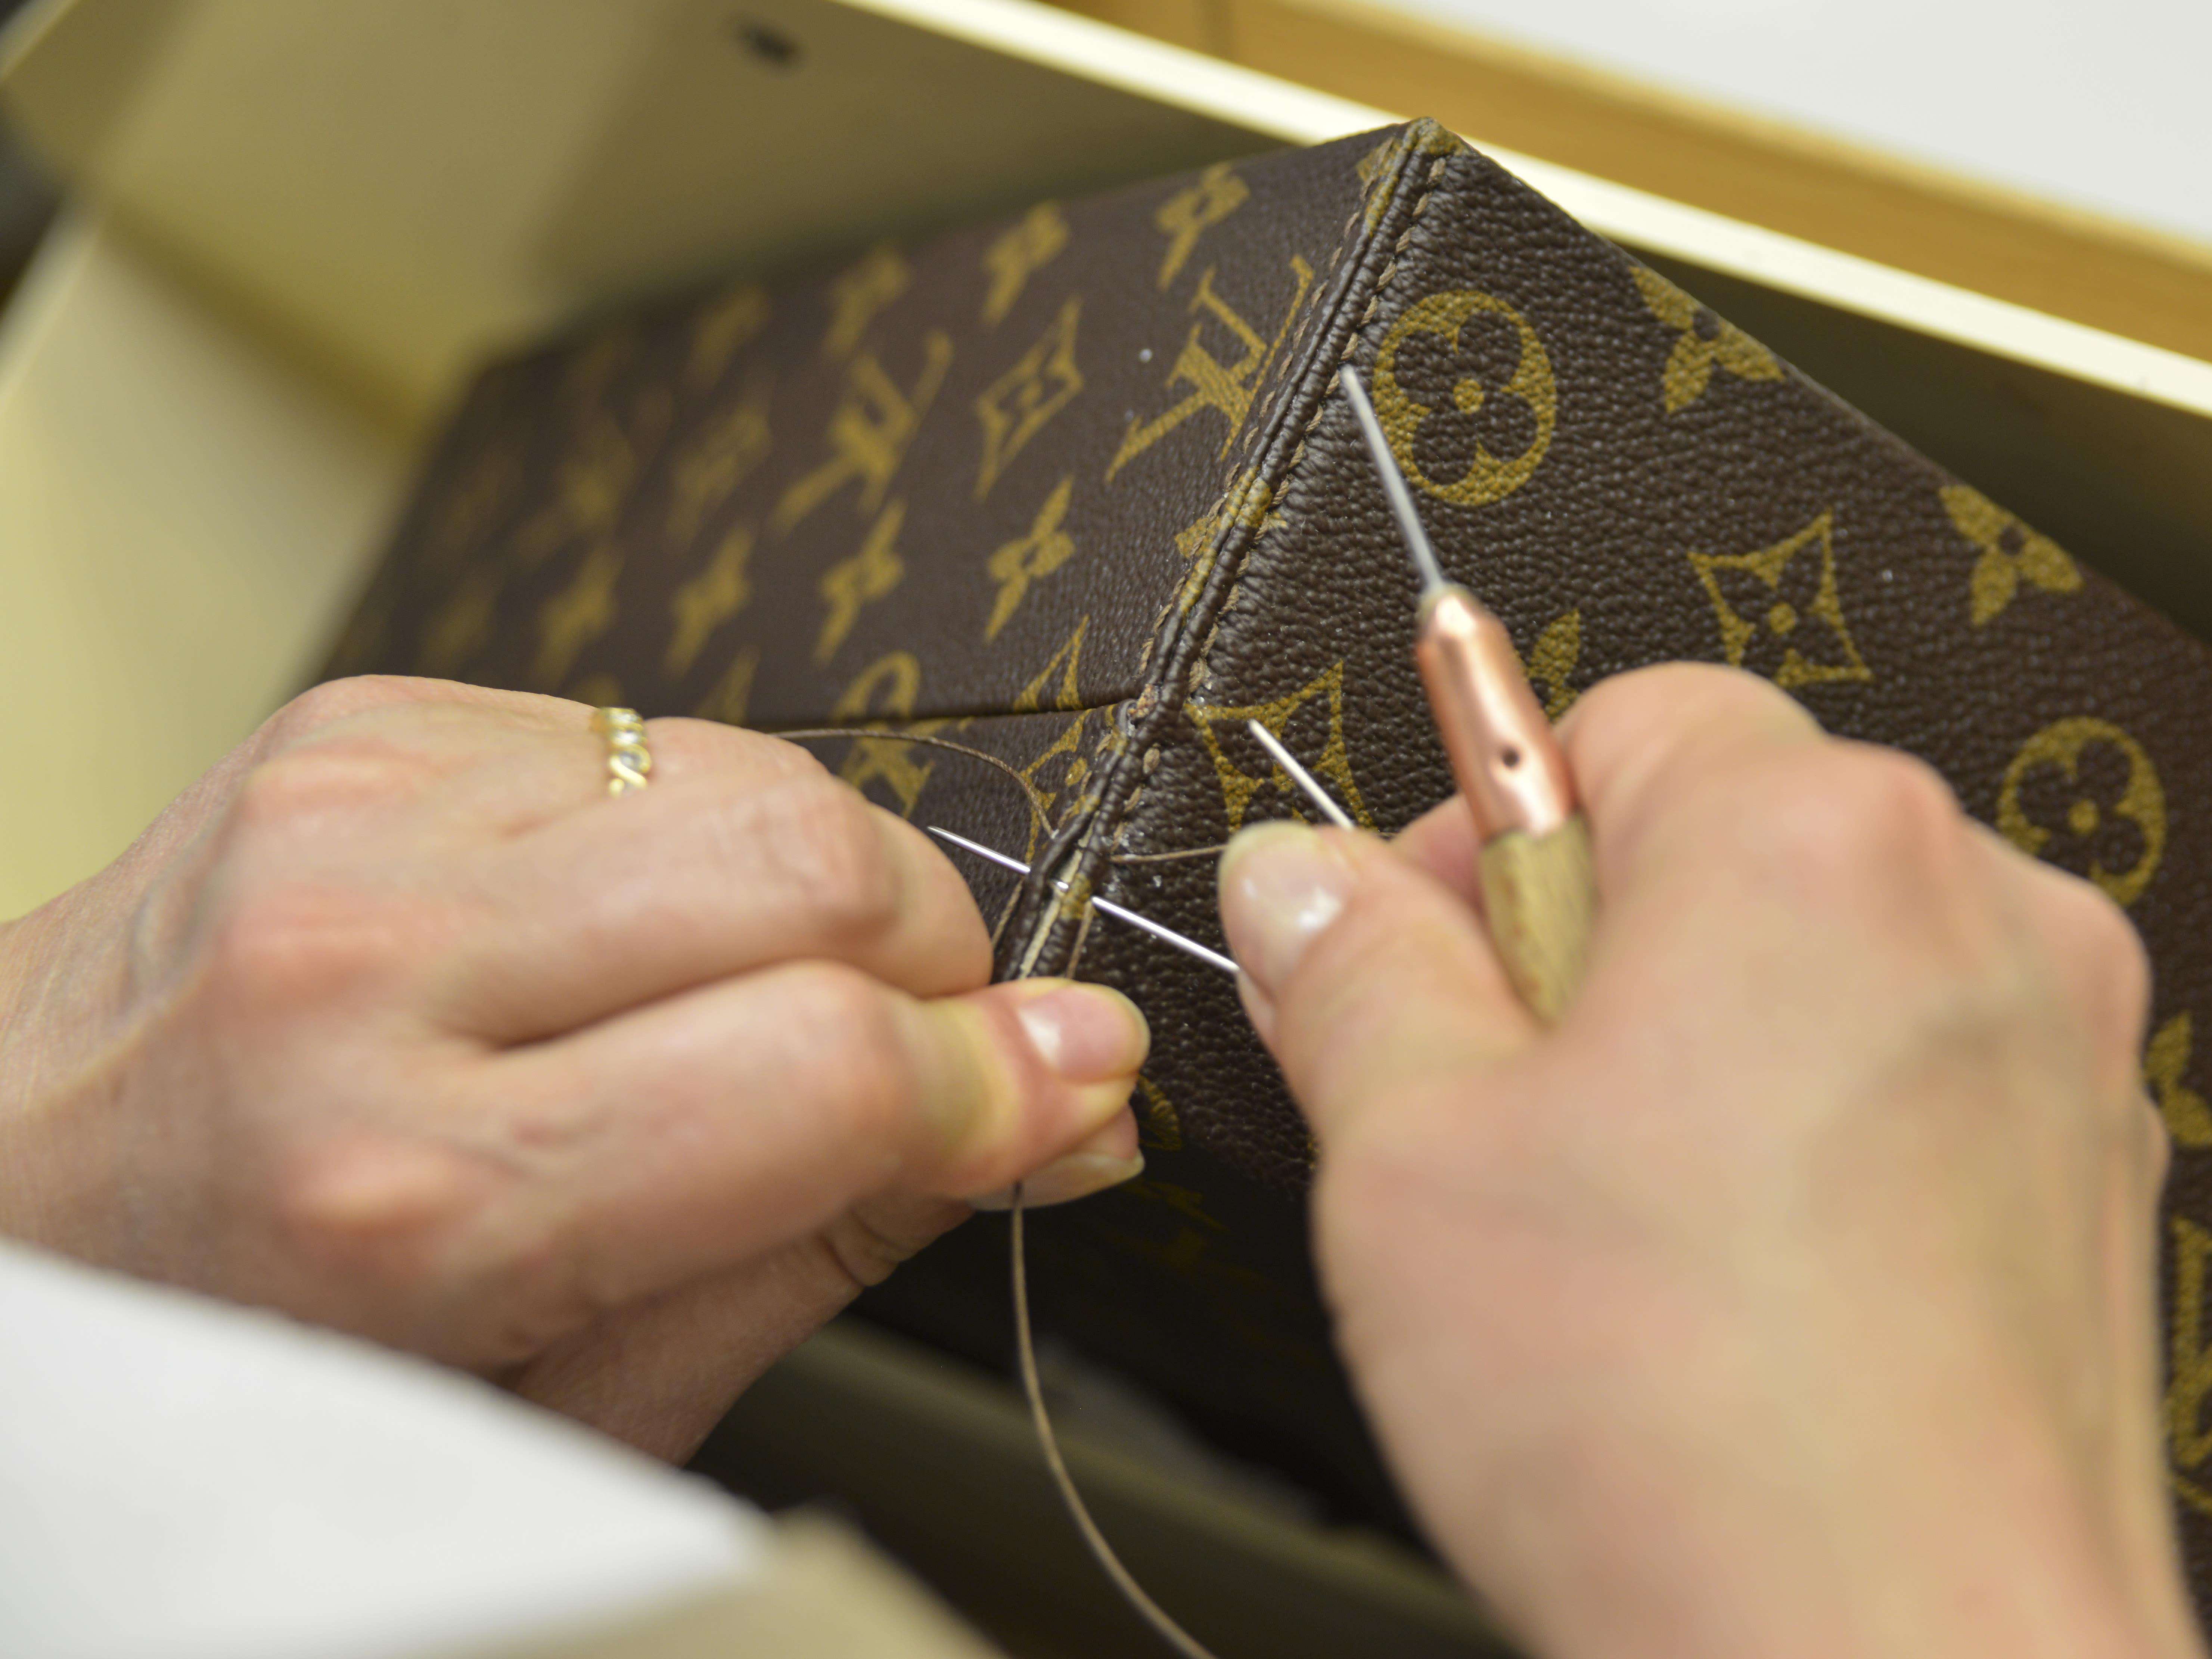 A worker cuts the distinctive LV logo fabric of natural cowhide leather  without using a ruler. He says he has been on the job here since 1988. The  interlocking chocolate brown and